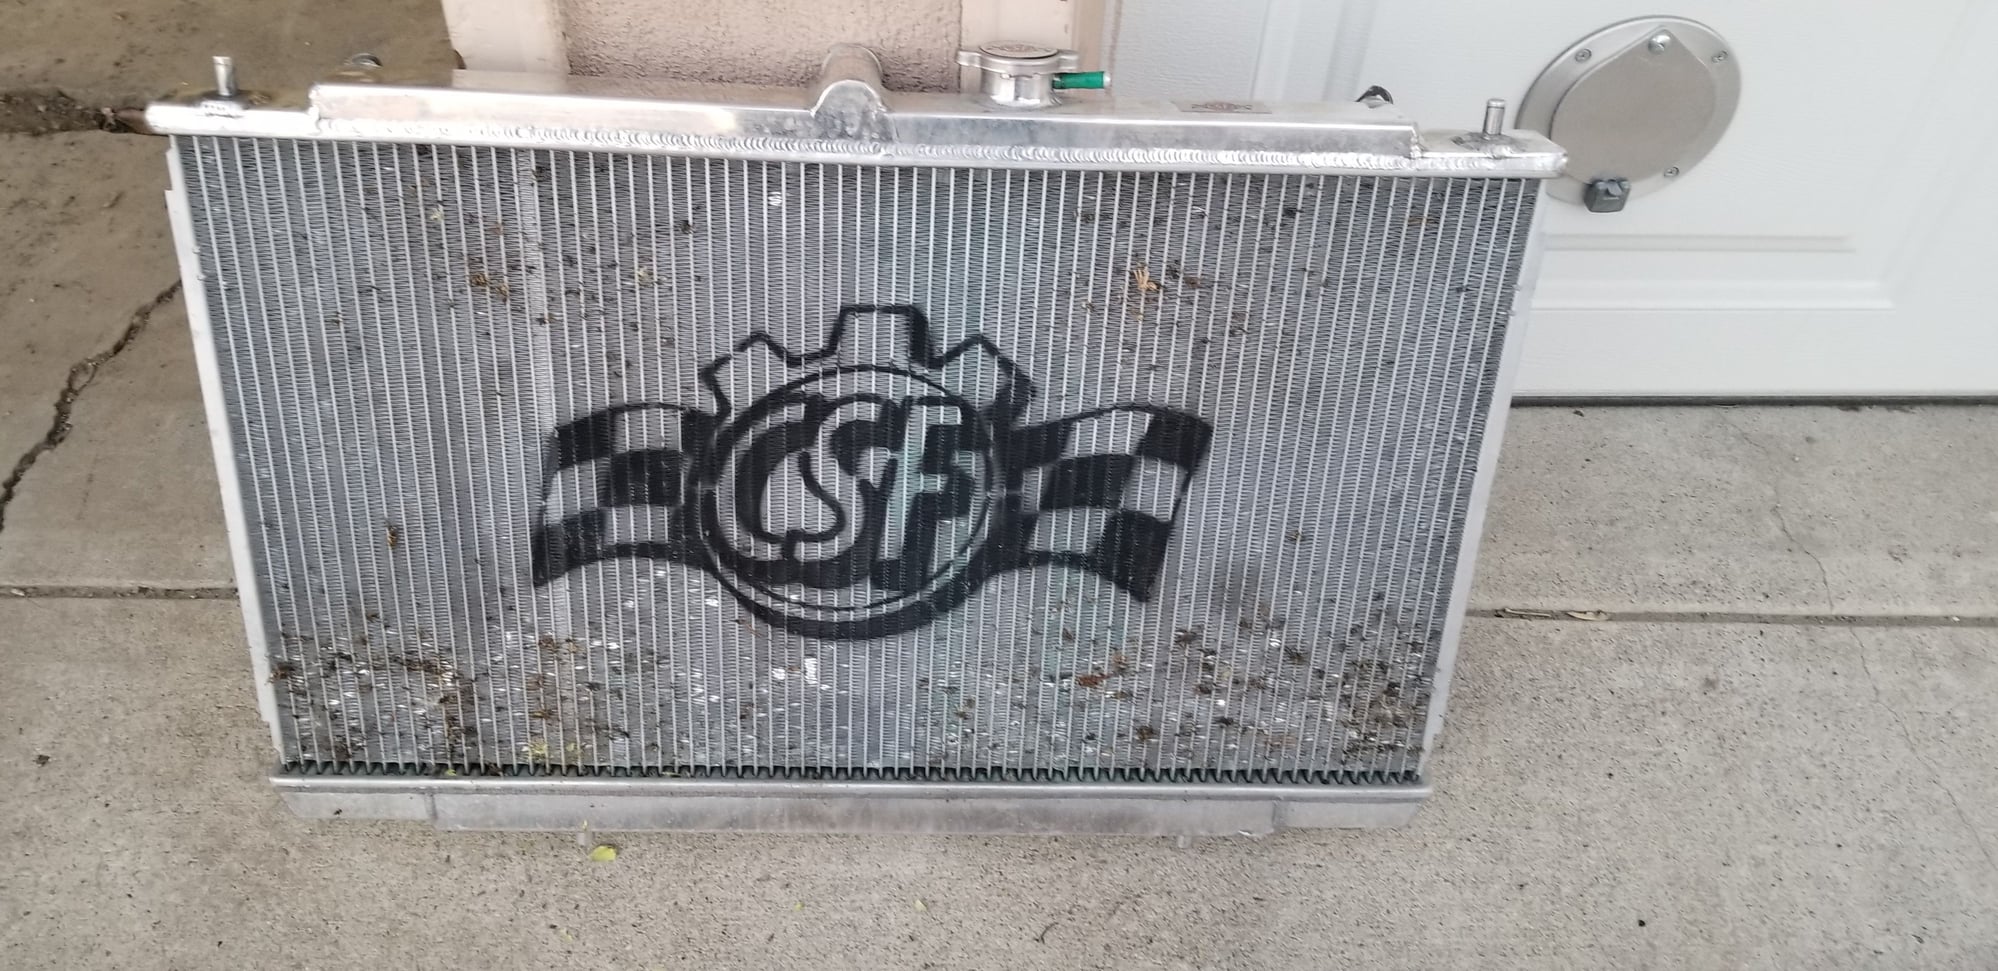 Miscellaneous - FS: Csf racing rad includes high cfm 98-02 hondas accord,99-03 acura tl 01-03acura cl - Used - 1999 to 2003 Acura TL - Calgary, AB T2A3Z3, Canada